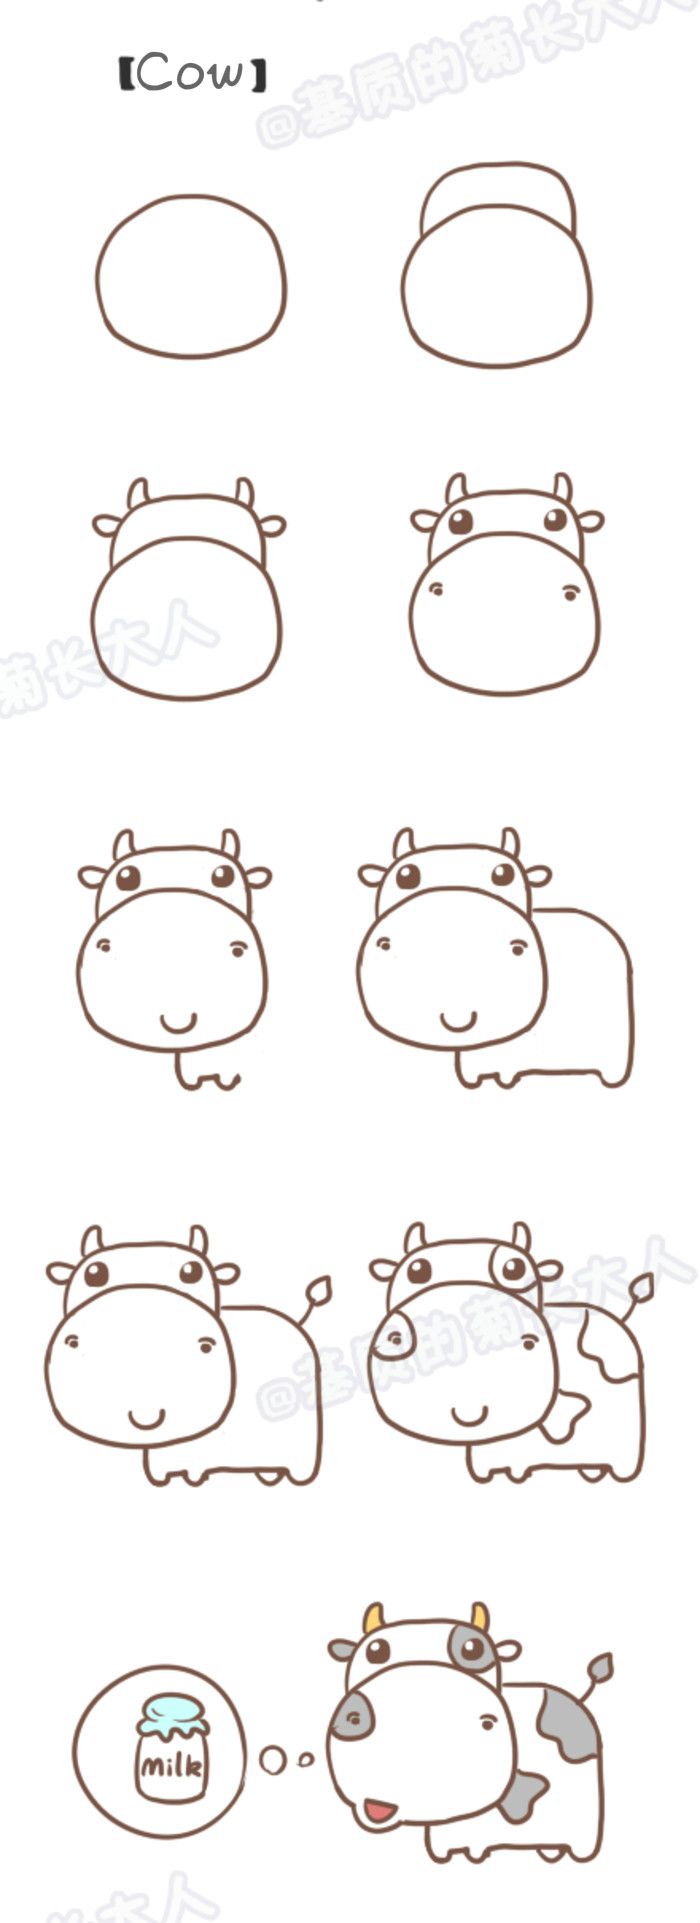 Step By Step Drawing Learn To Draw A Cow